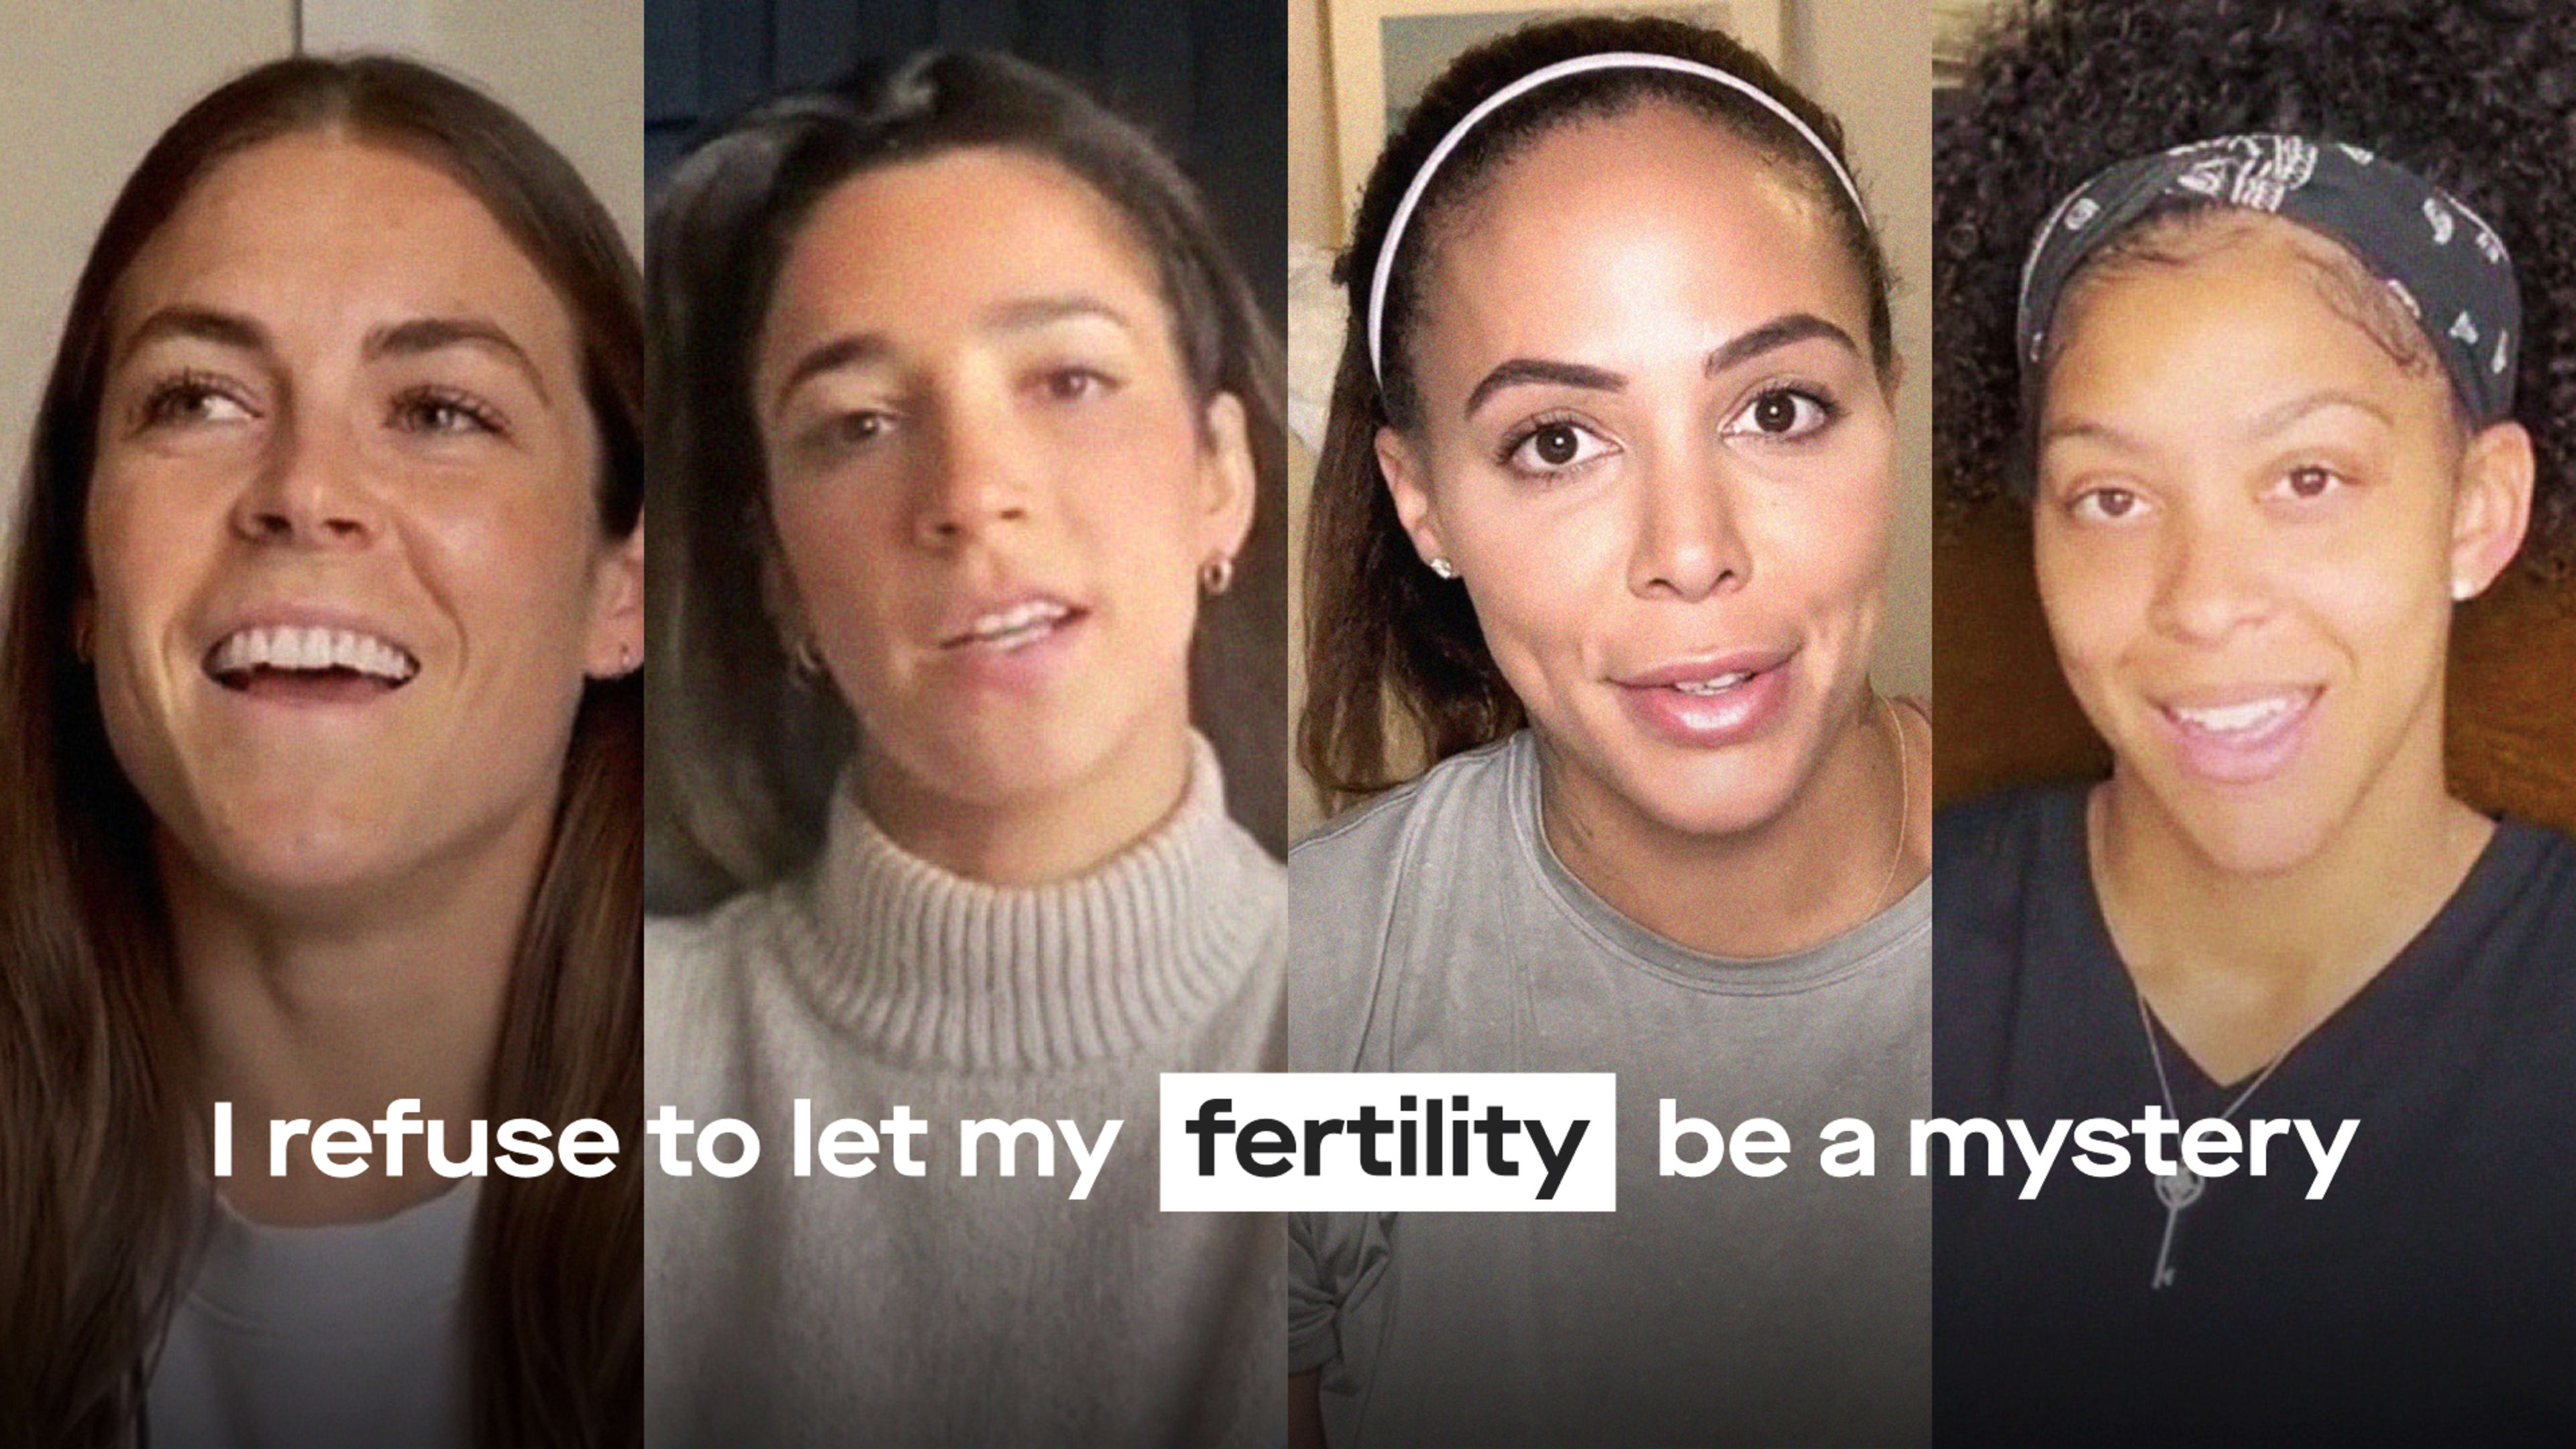 Exclusive: Modern Fertility announces a new campaign featuring female athletes